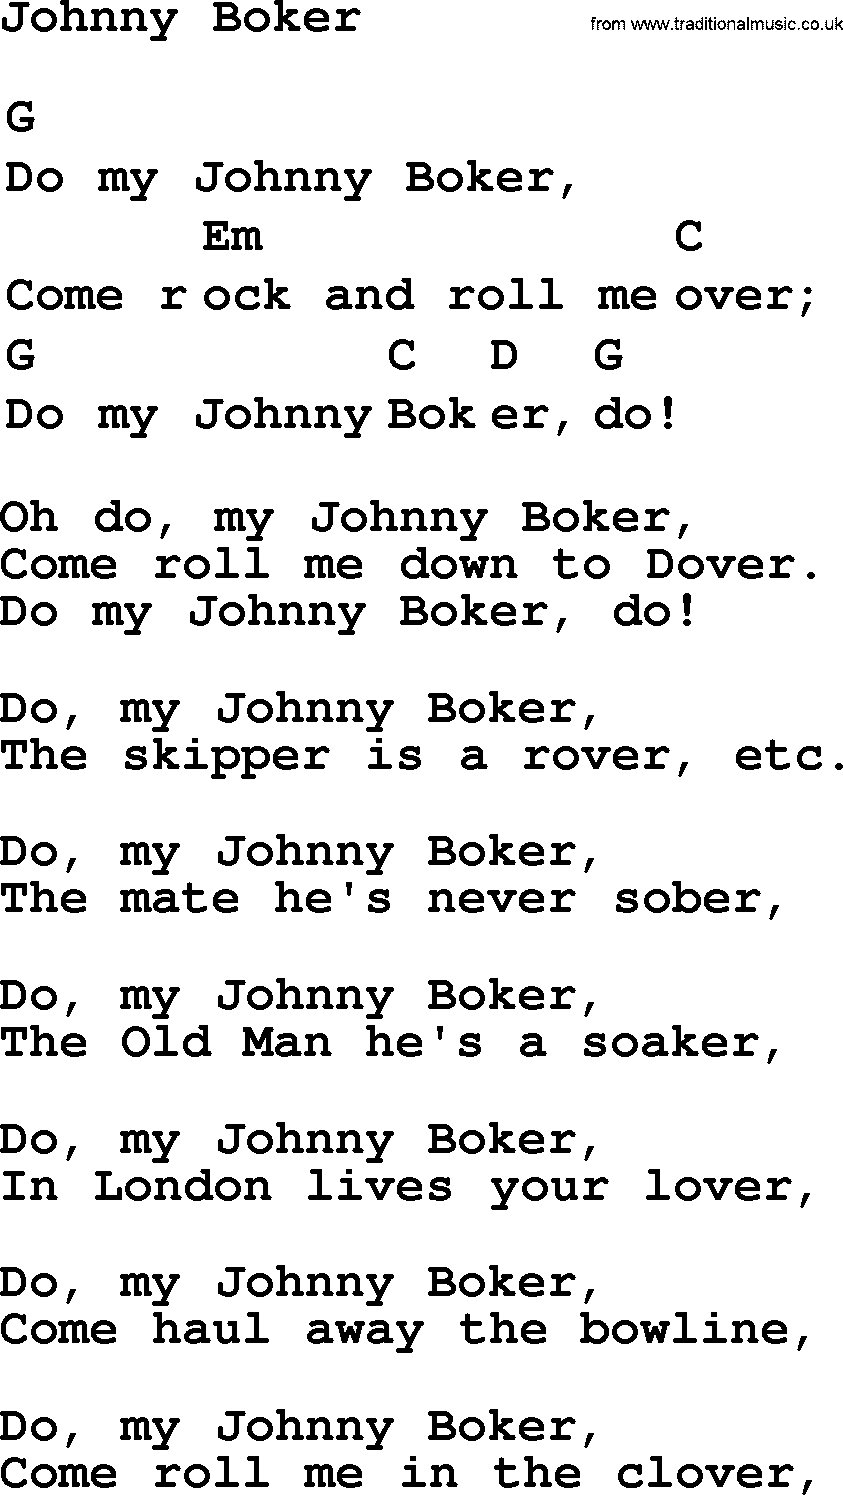 Top 1000 Most Popular Folk and Old-time Songs: Johnny Boker, lyrics and chords